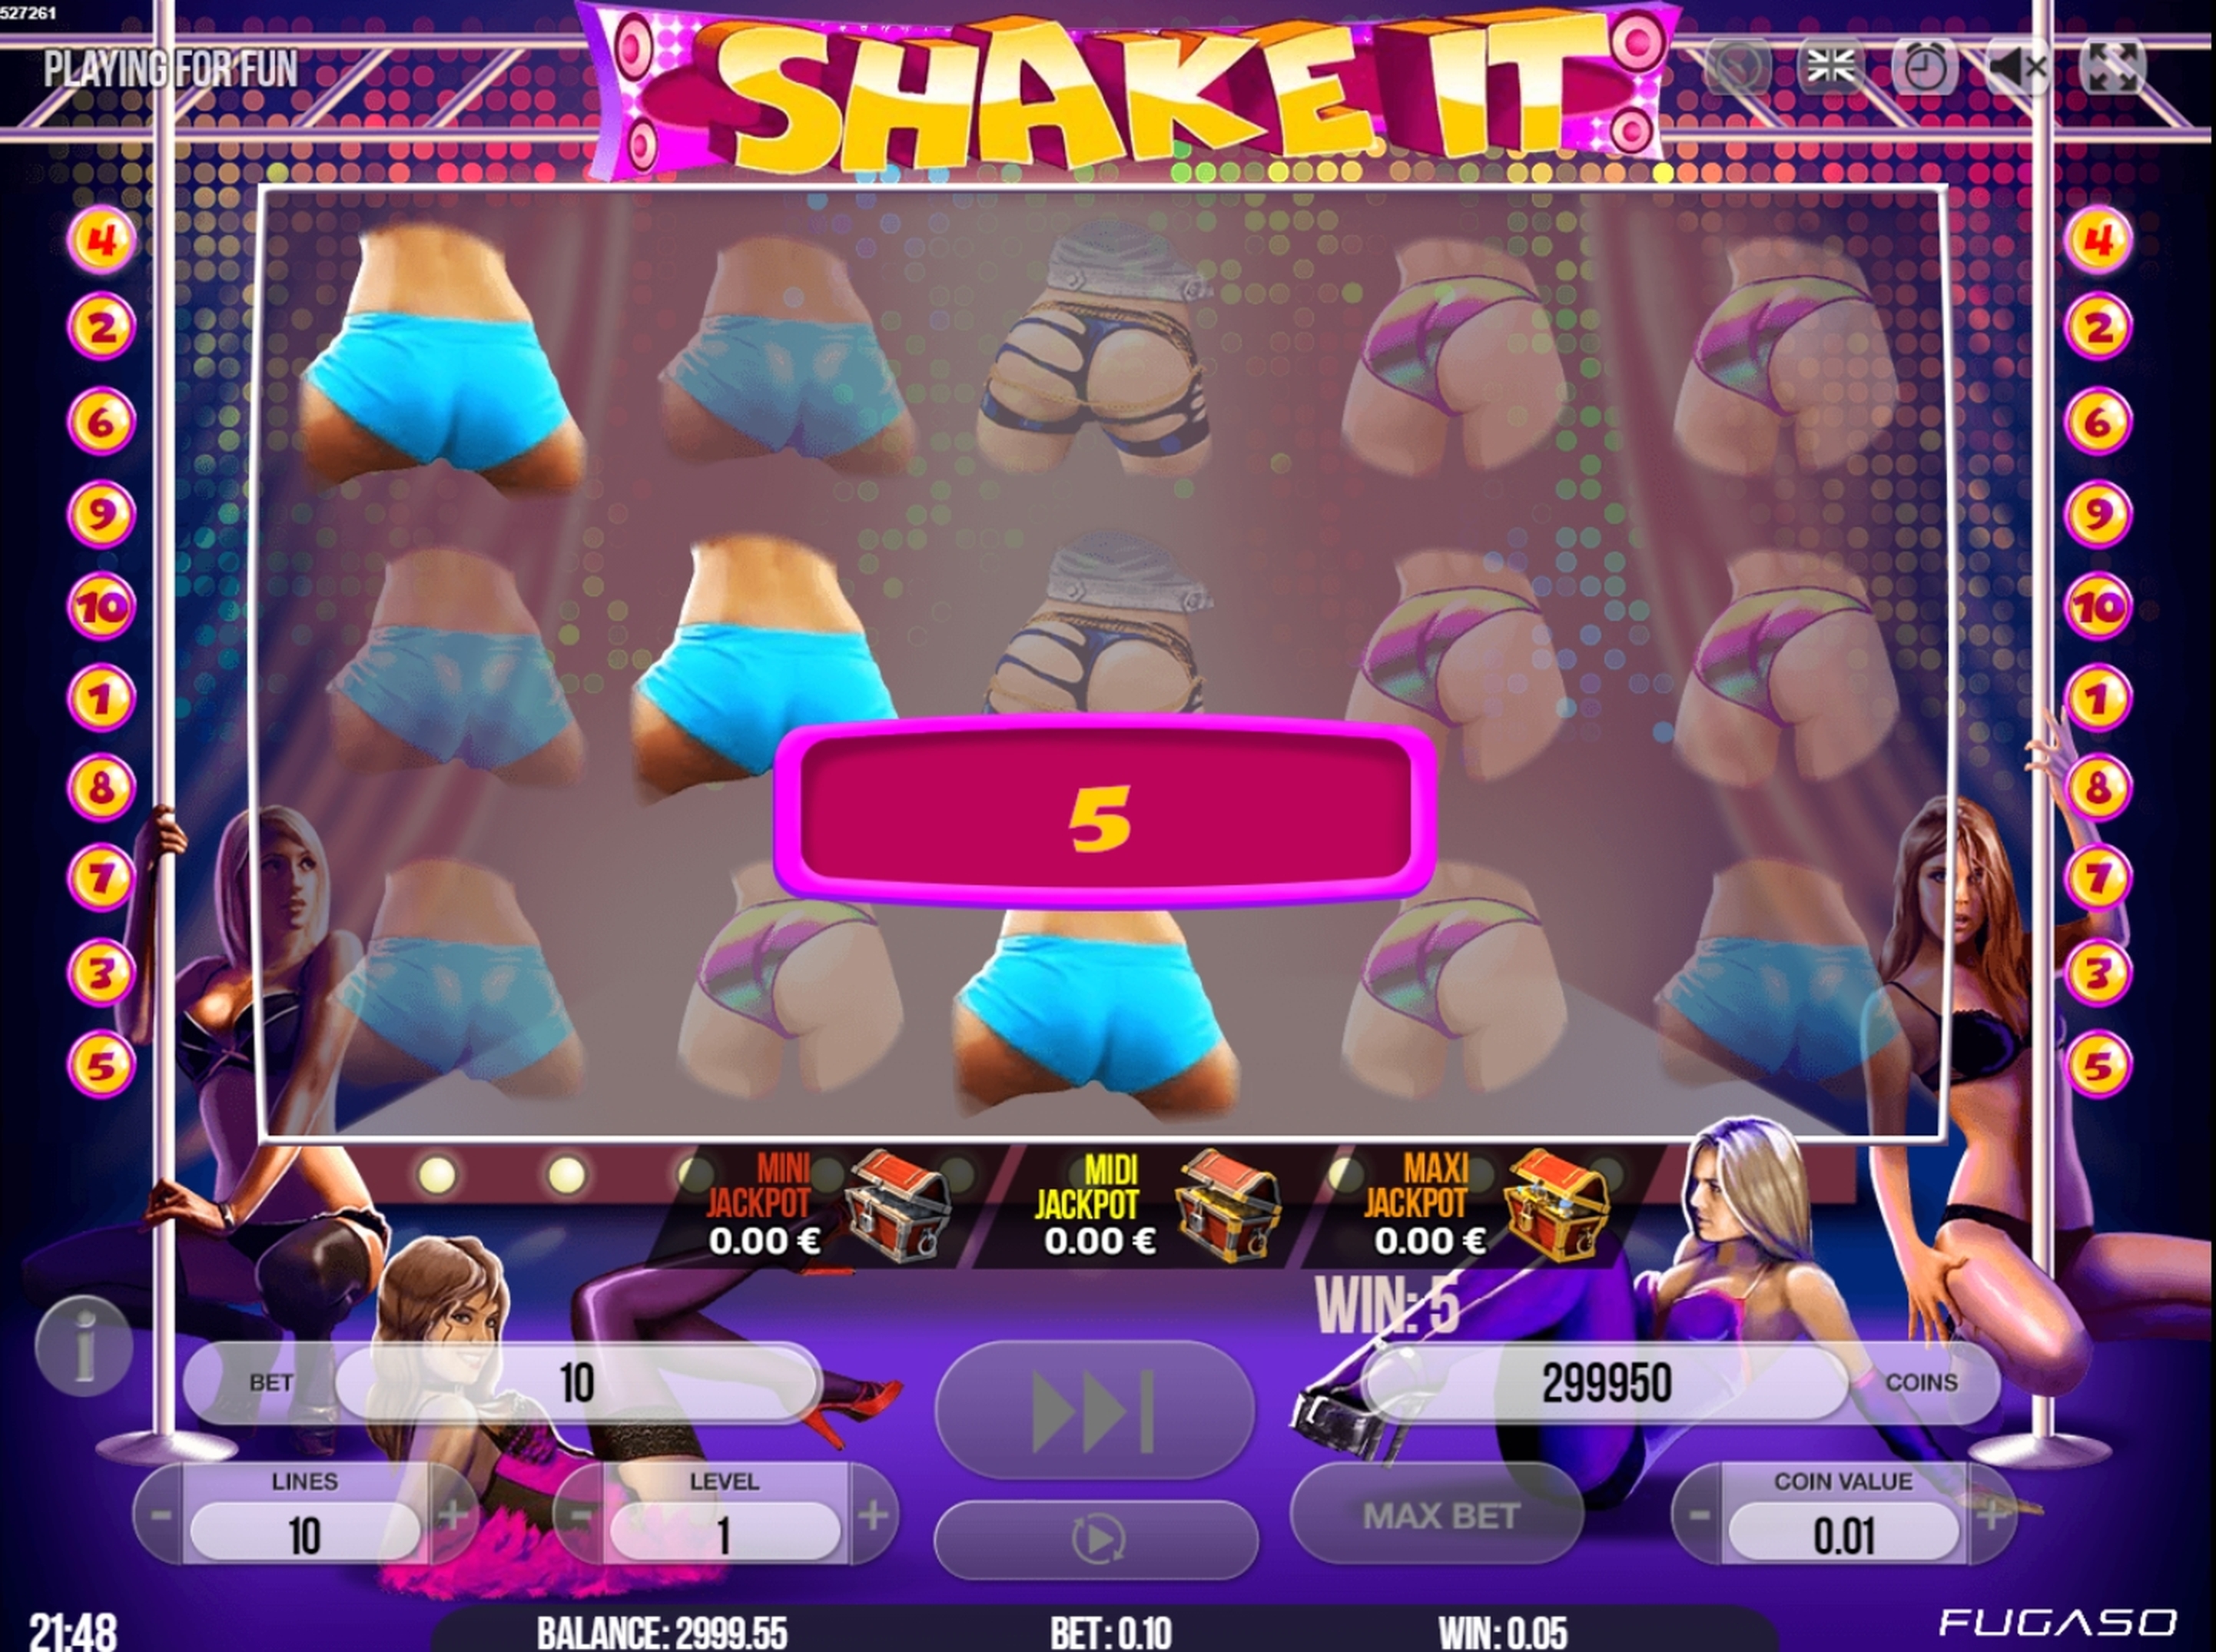 Win Money in Shake It Free Slot Game by Fugaso